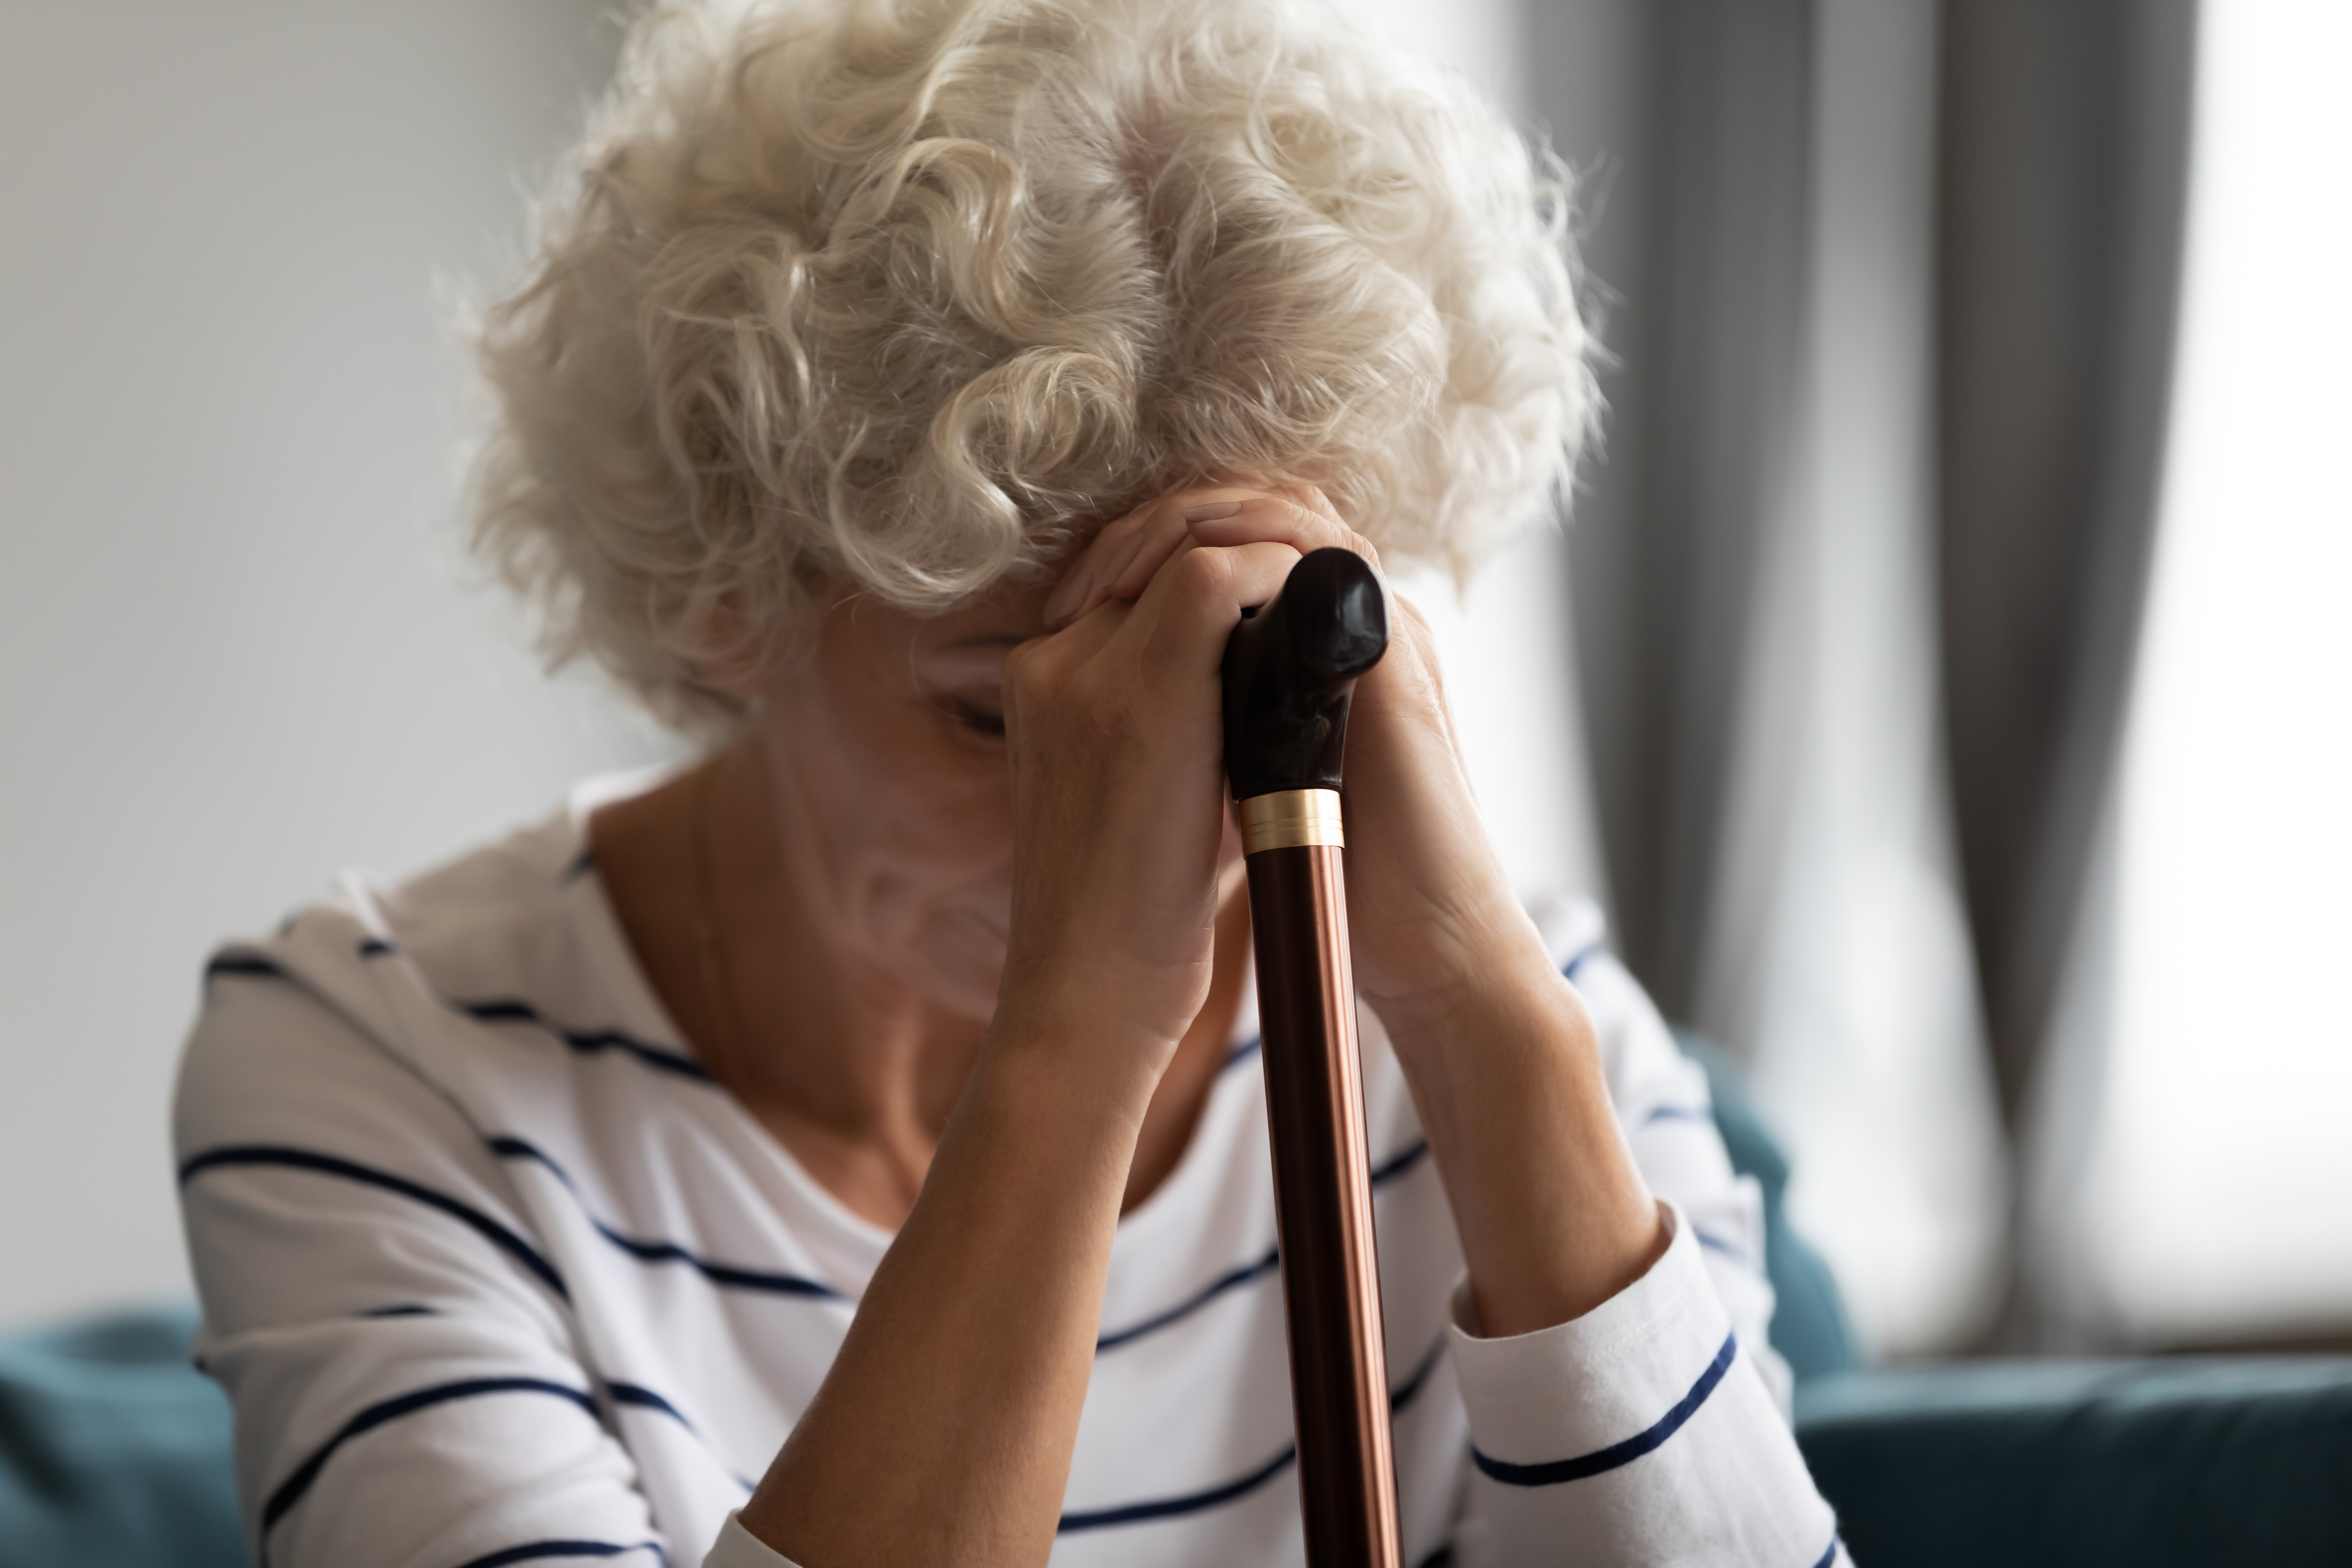 A sad woman balancing her hands and head on a walking cane | Source: Shutterstock